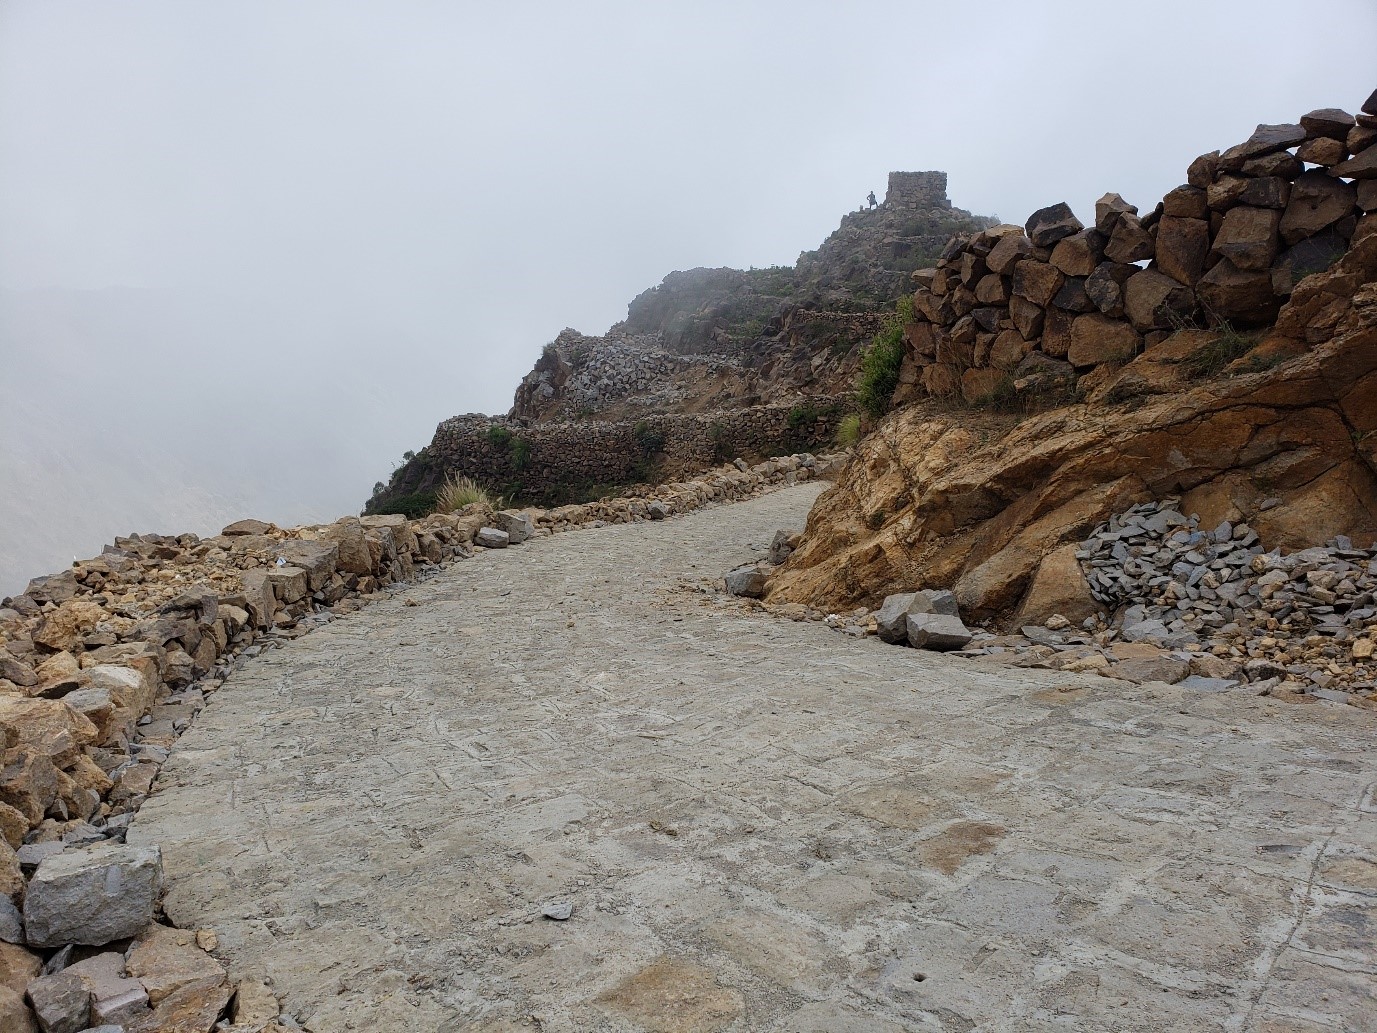 A stone road with rocks and a stone wall